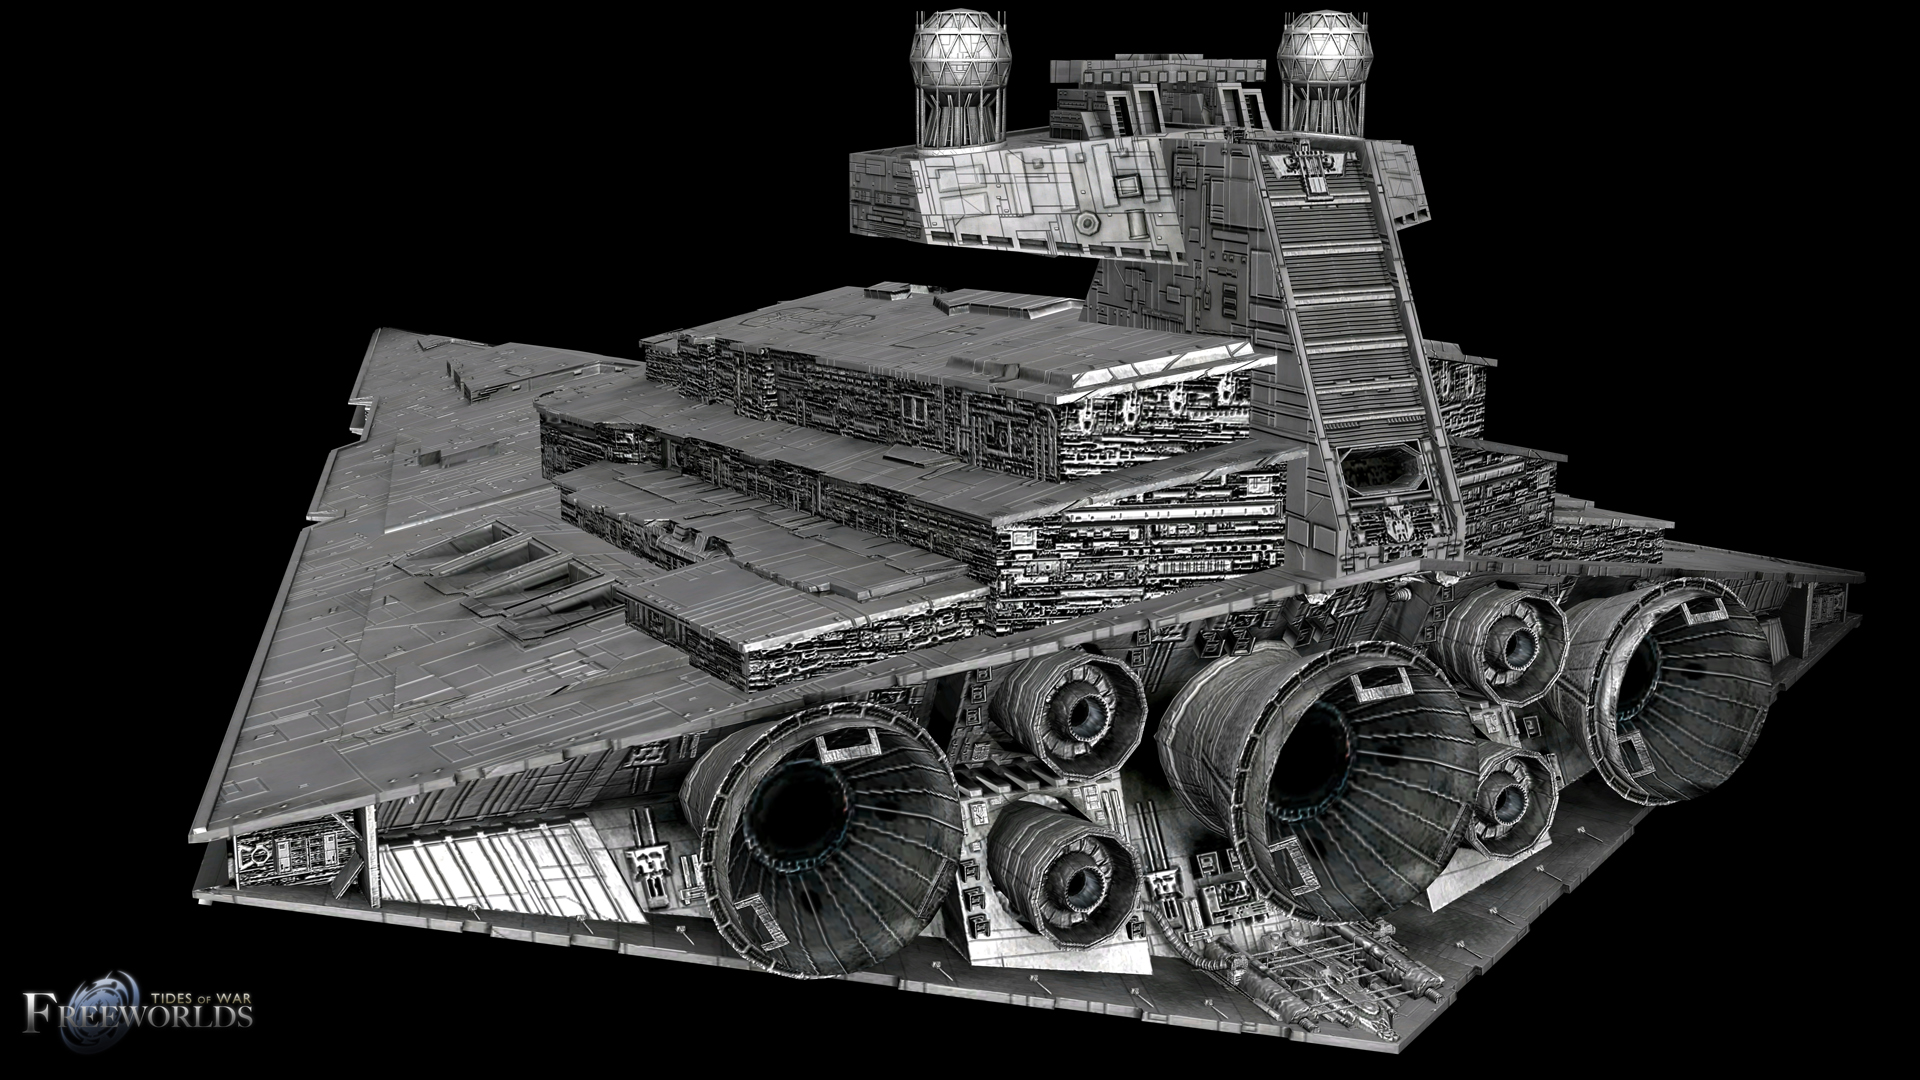  feed Report content Imperial Star Destroyer Normal Map view original